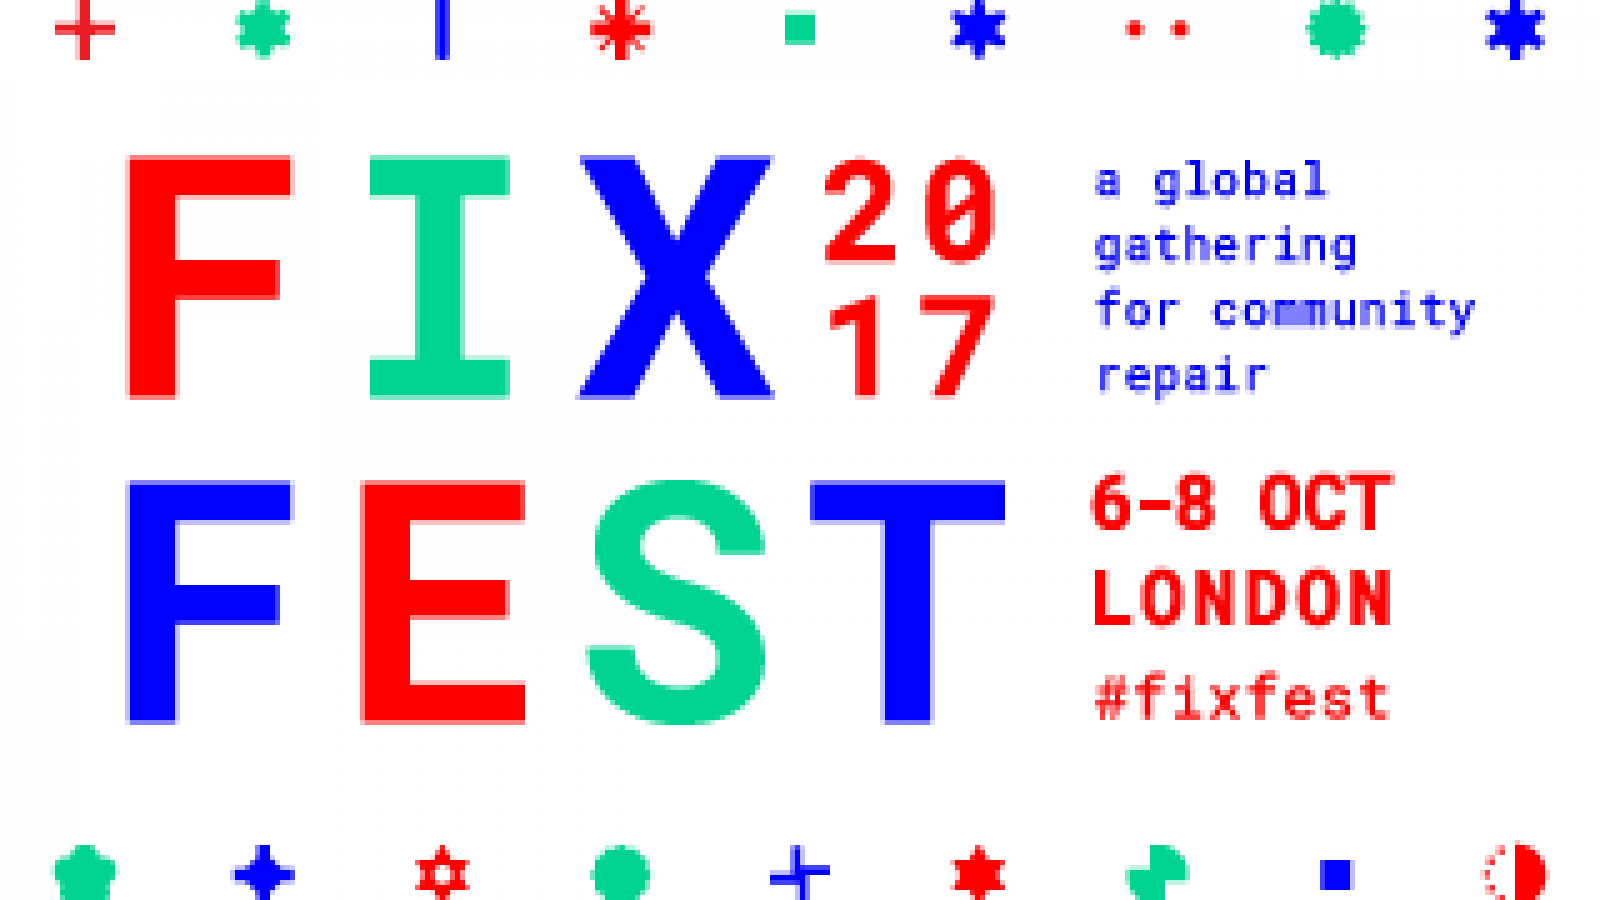 Fixfest’s visual rallying cry